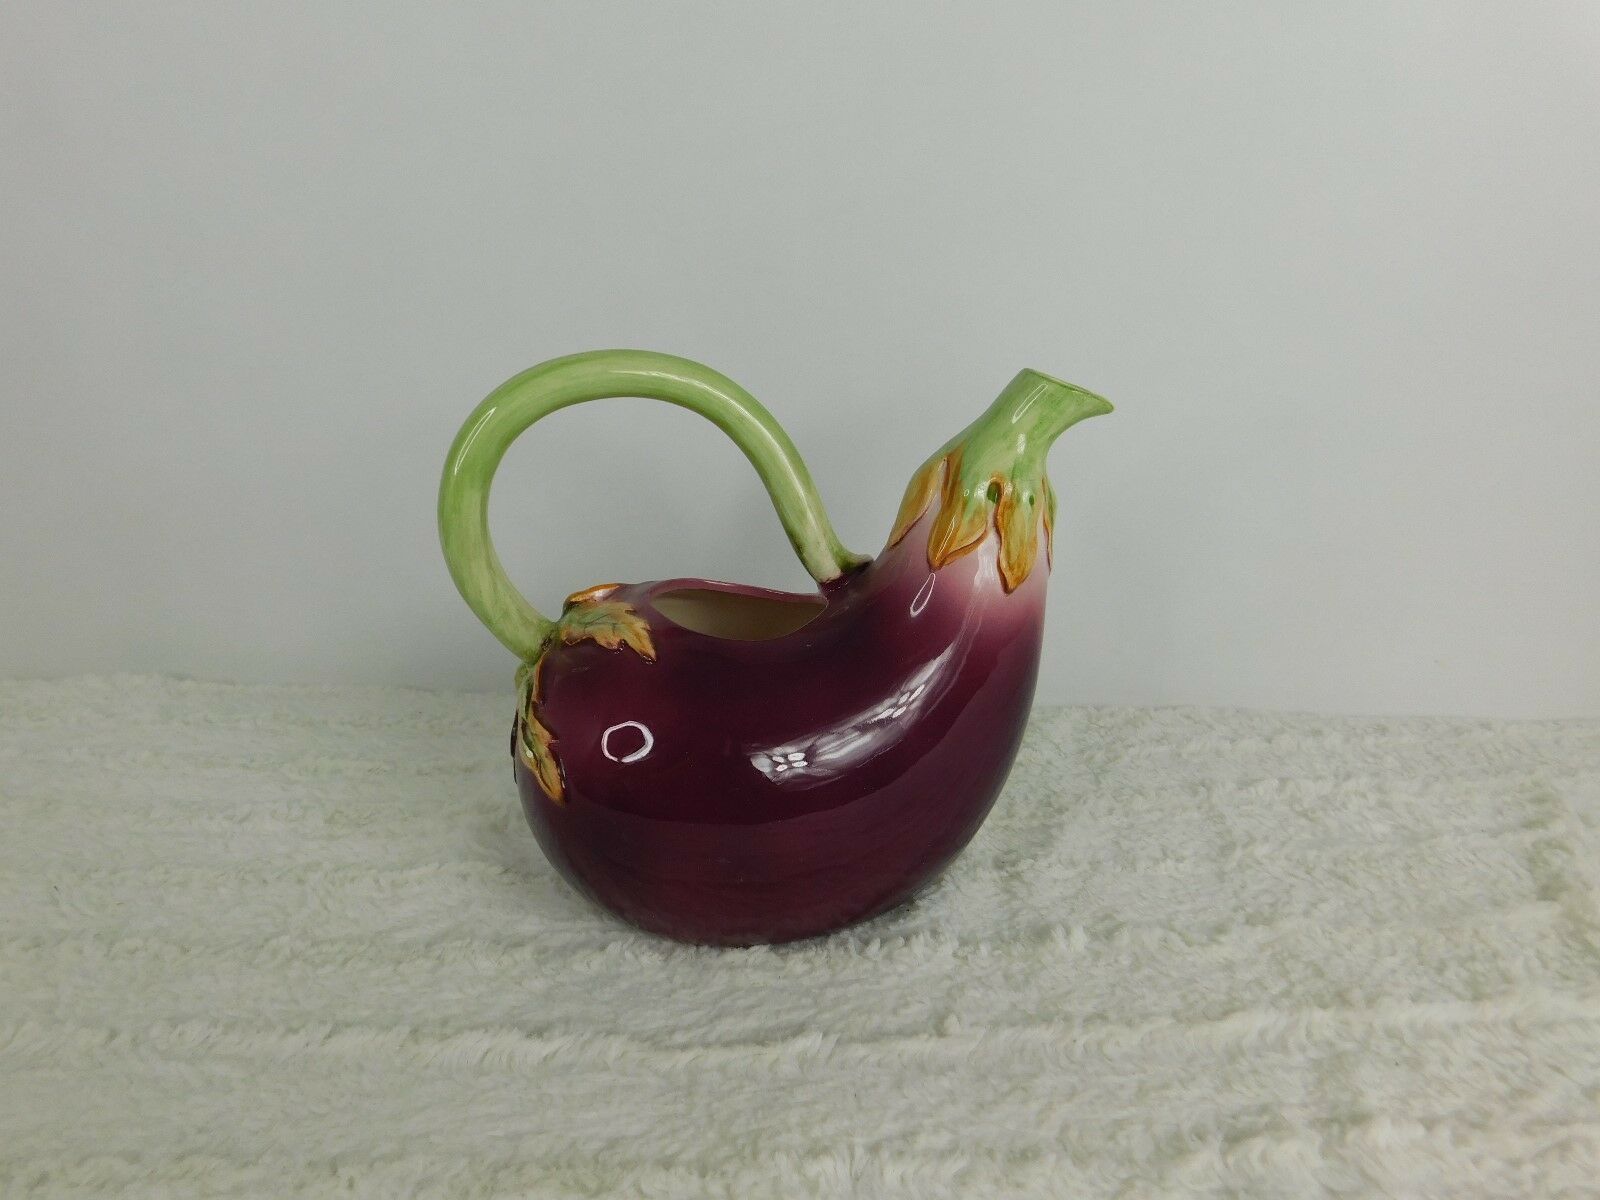 Primary image for 1989 FITZ & FLOYD PITCHER JUG WATER JUICE PITCHER EGGPLANT PURPLE 1.5 QT NICE